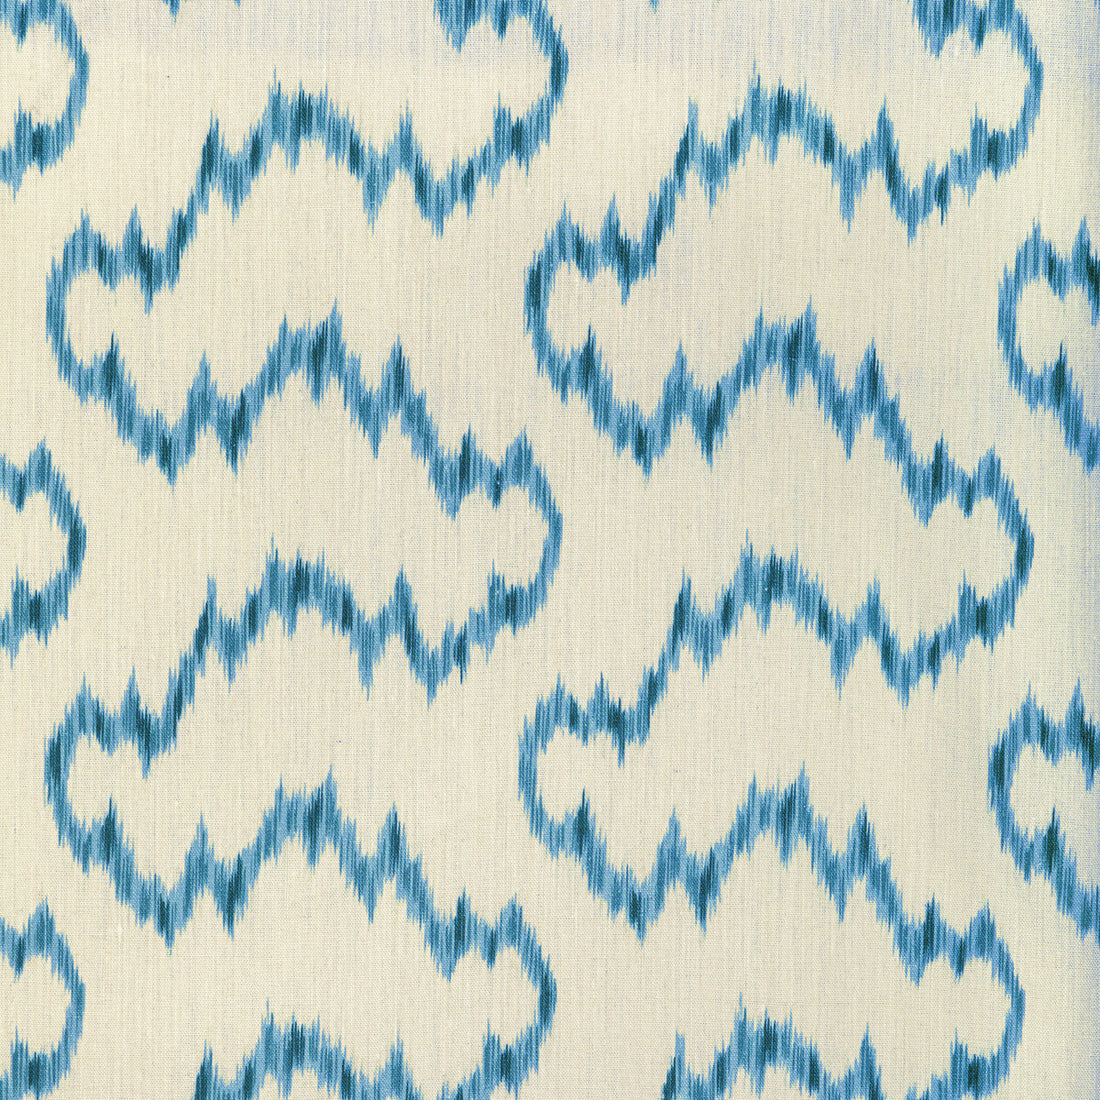 Mallorcan Ikat fabric in delft color - pattern 2022104.516.0 - by Lee Jofa in the Sarah Bartholomew collection